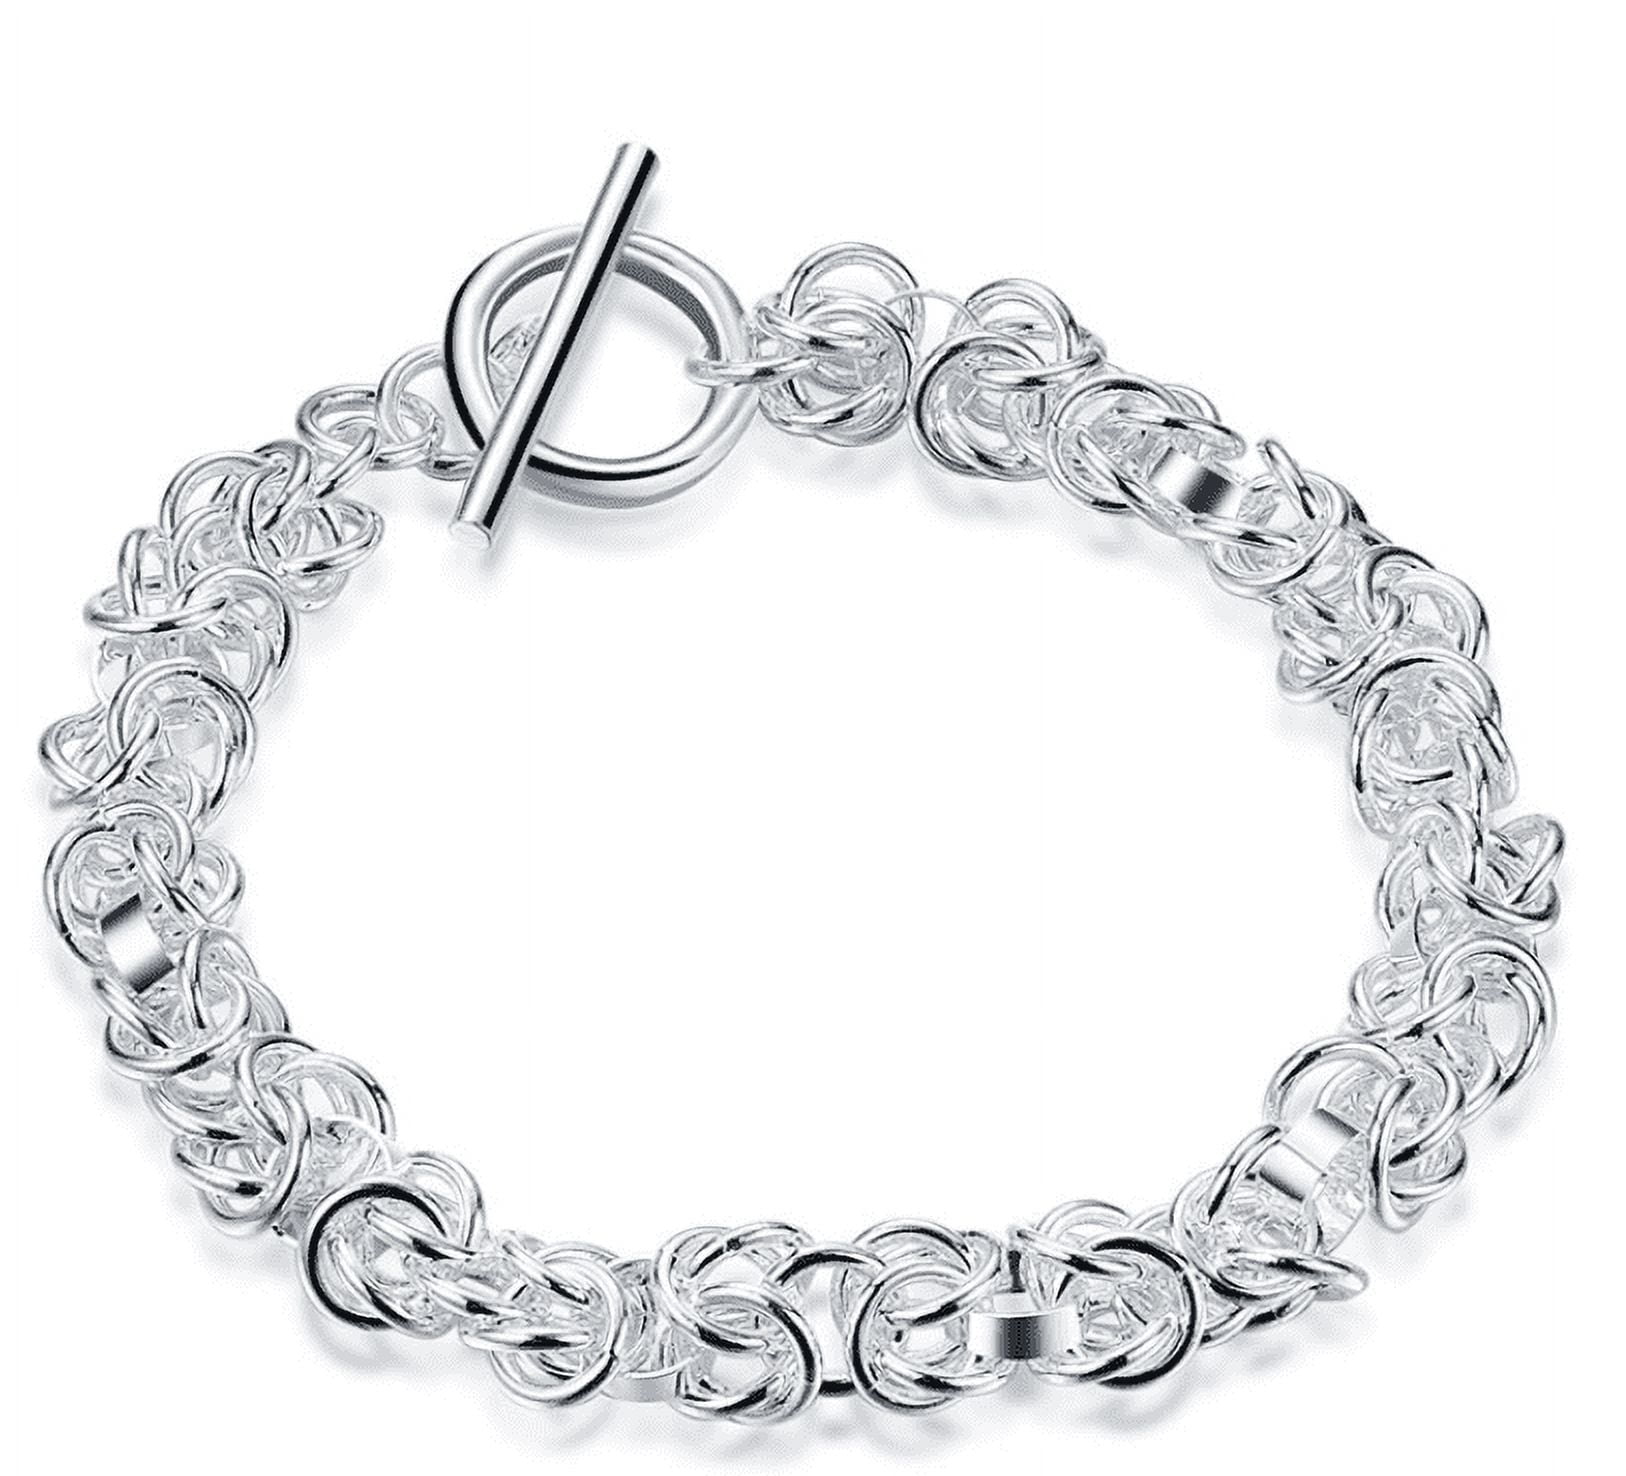 925 Sterling Silver Bracelet for Women | 7 Inch Floral Bangle with Hinged  Clasp | Lightweight Anti-tarnishing Sterling Silver Bangle Bracelet for  Women | Silver Bangles for Women by MAX + STONE - Walmart.com